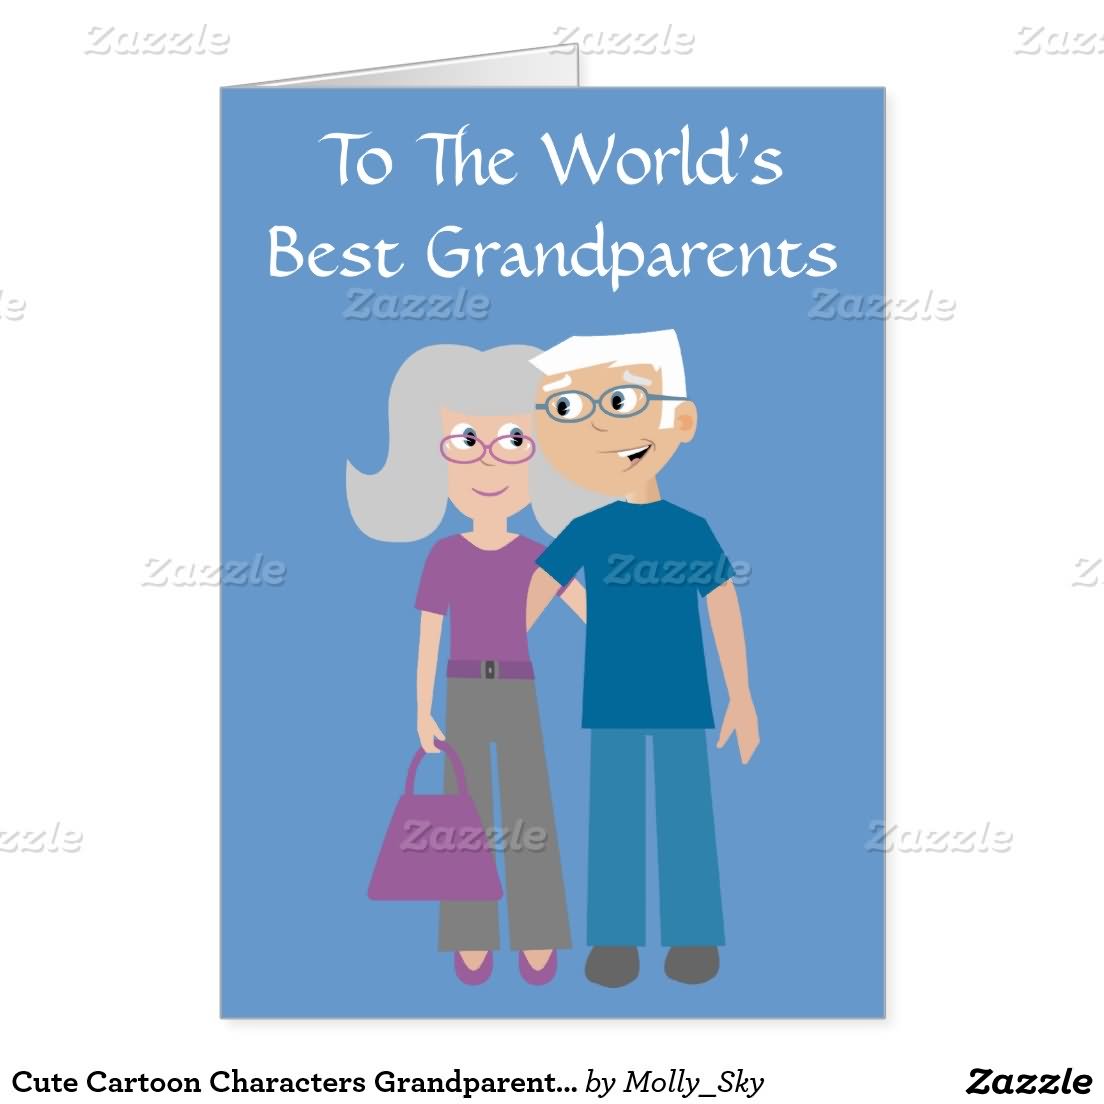 To The World's Best Grandparents On Grandparents Day